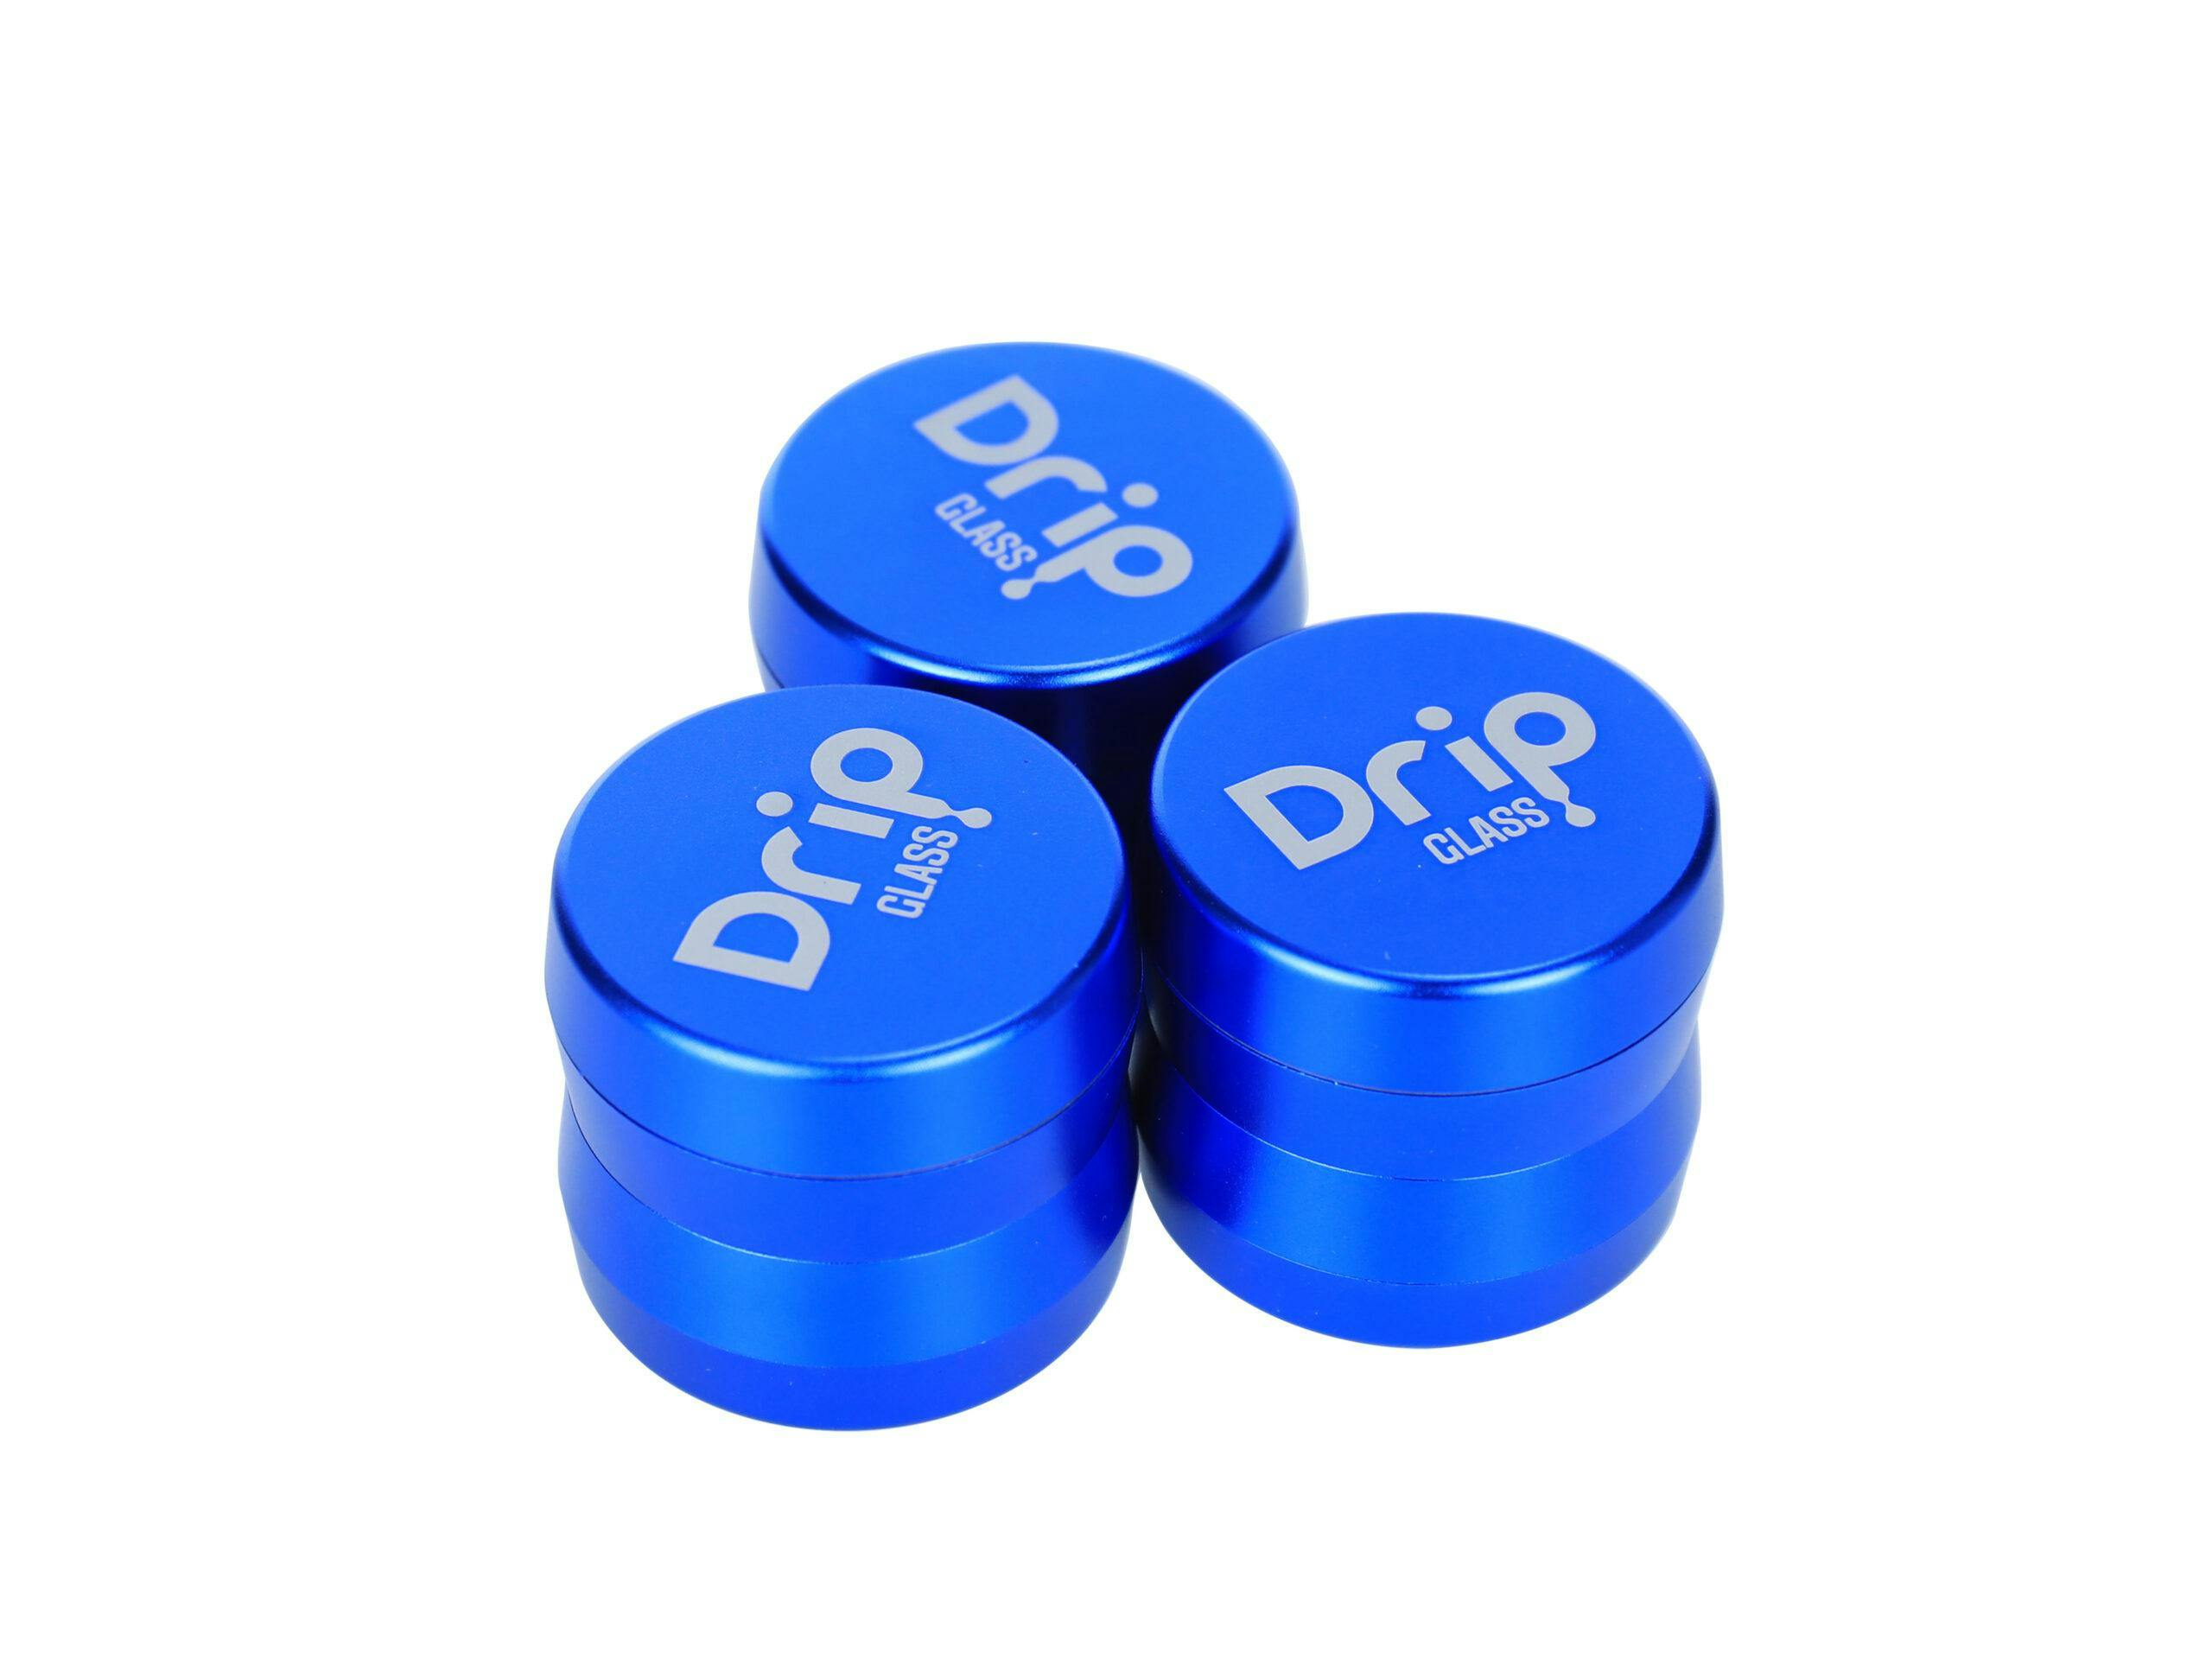 Product for sale: Drip GD-104 4 Parts Grinder